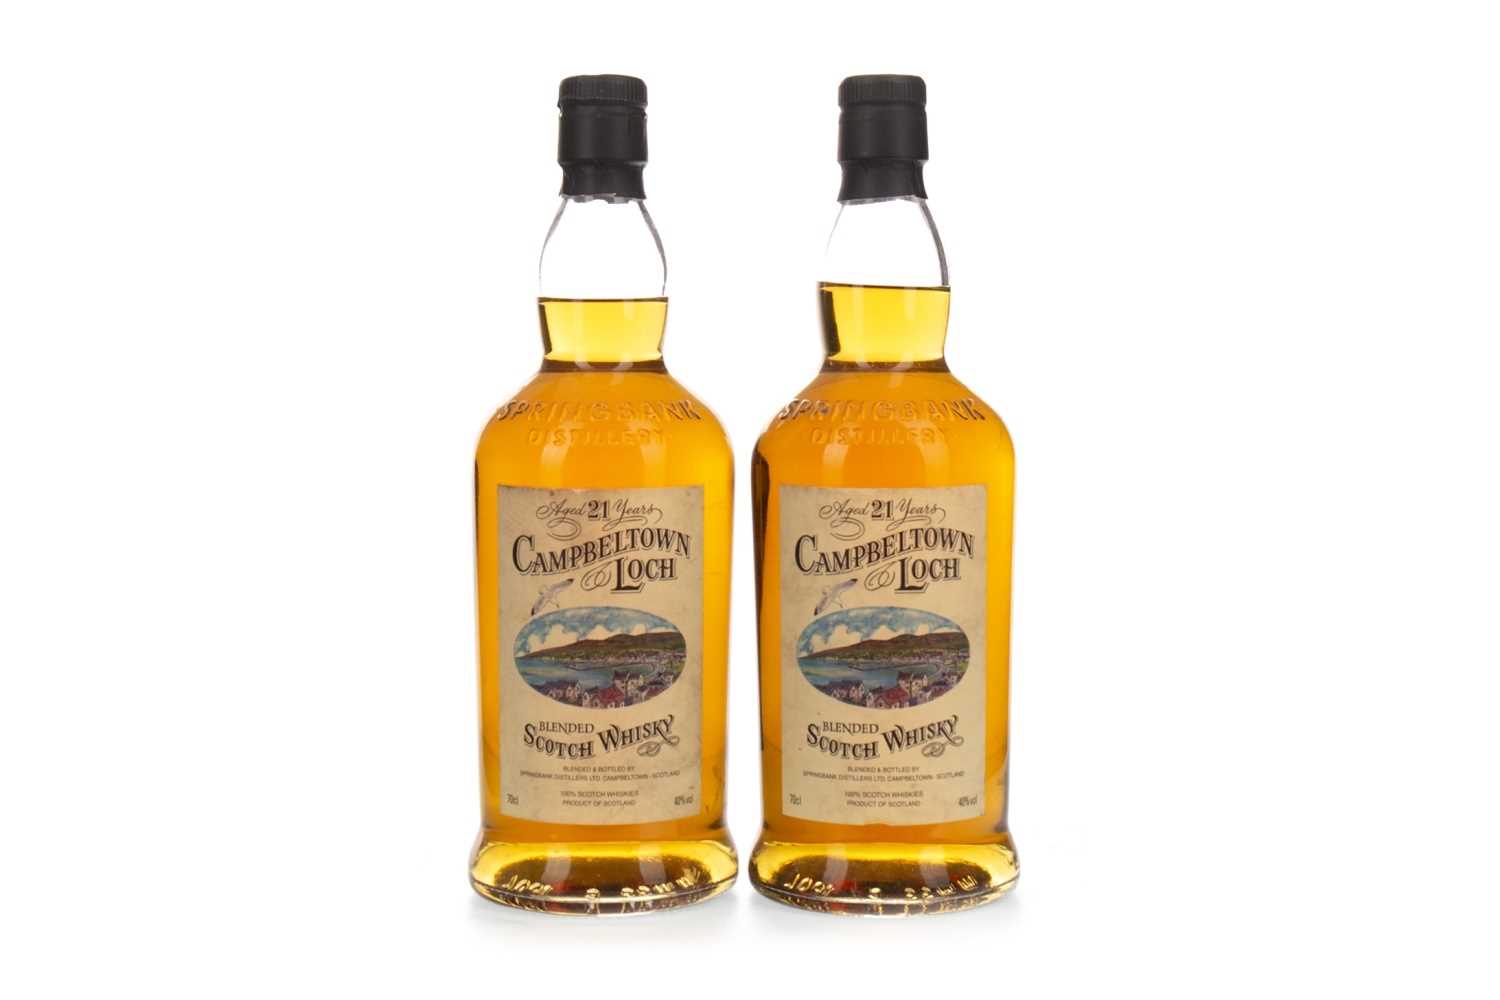 Lot 1089 - TWO BOTTLES OF CAMPBELTOWN LOCH 21 YEARS OLD